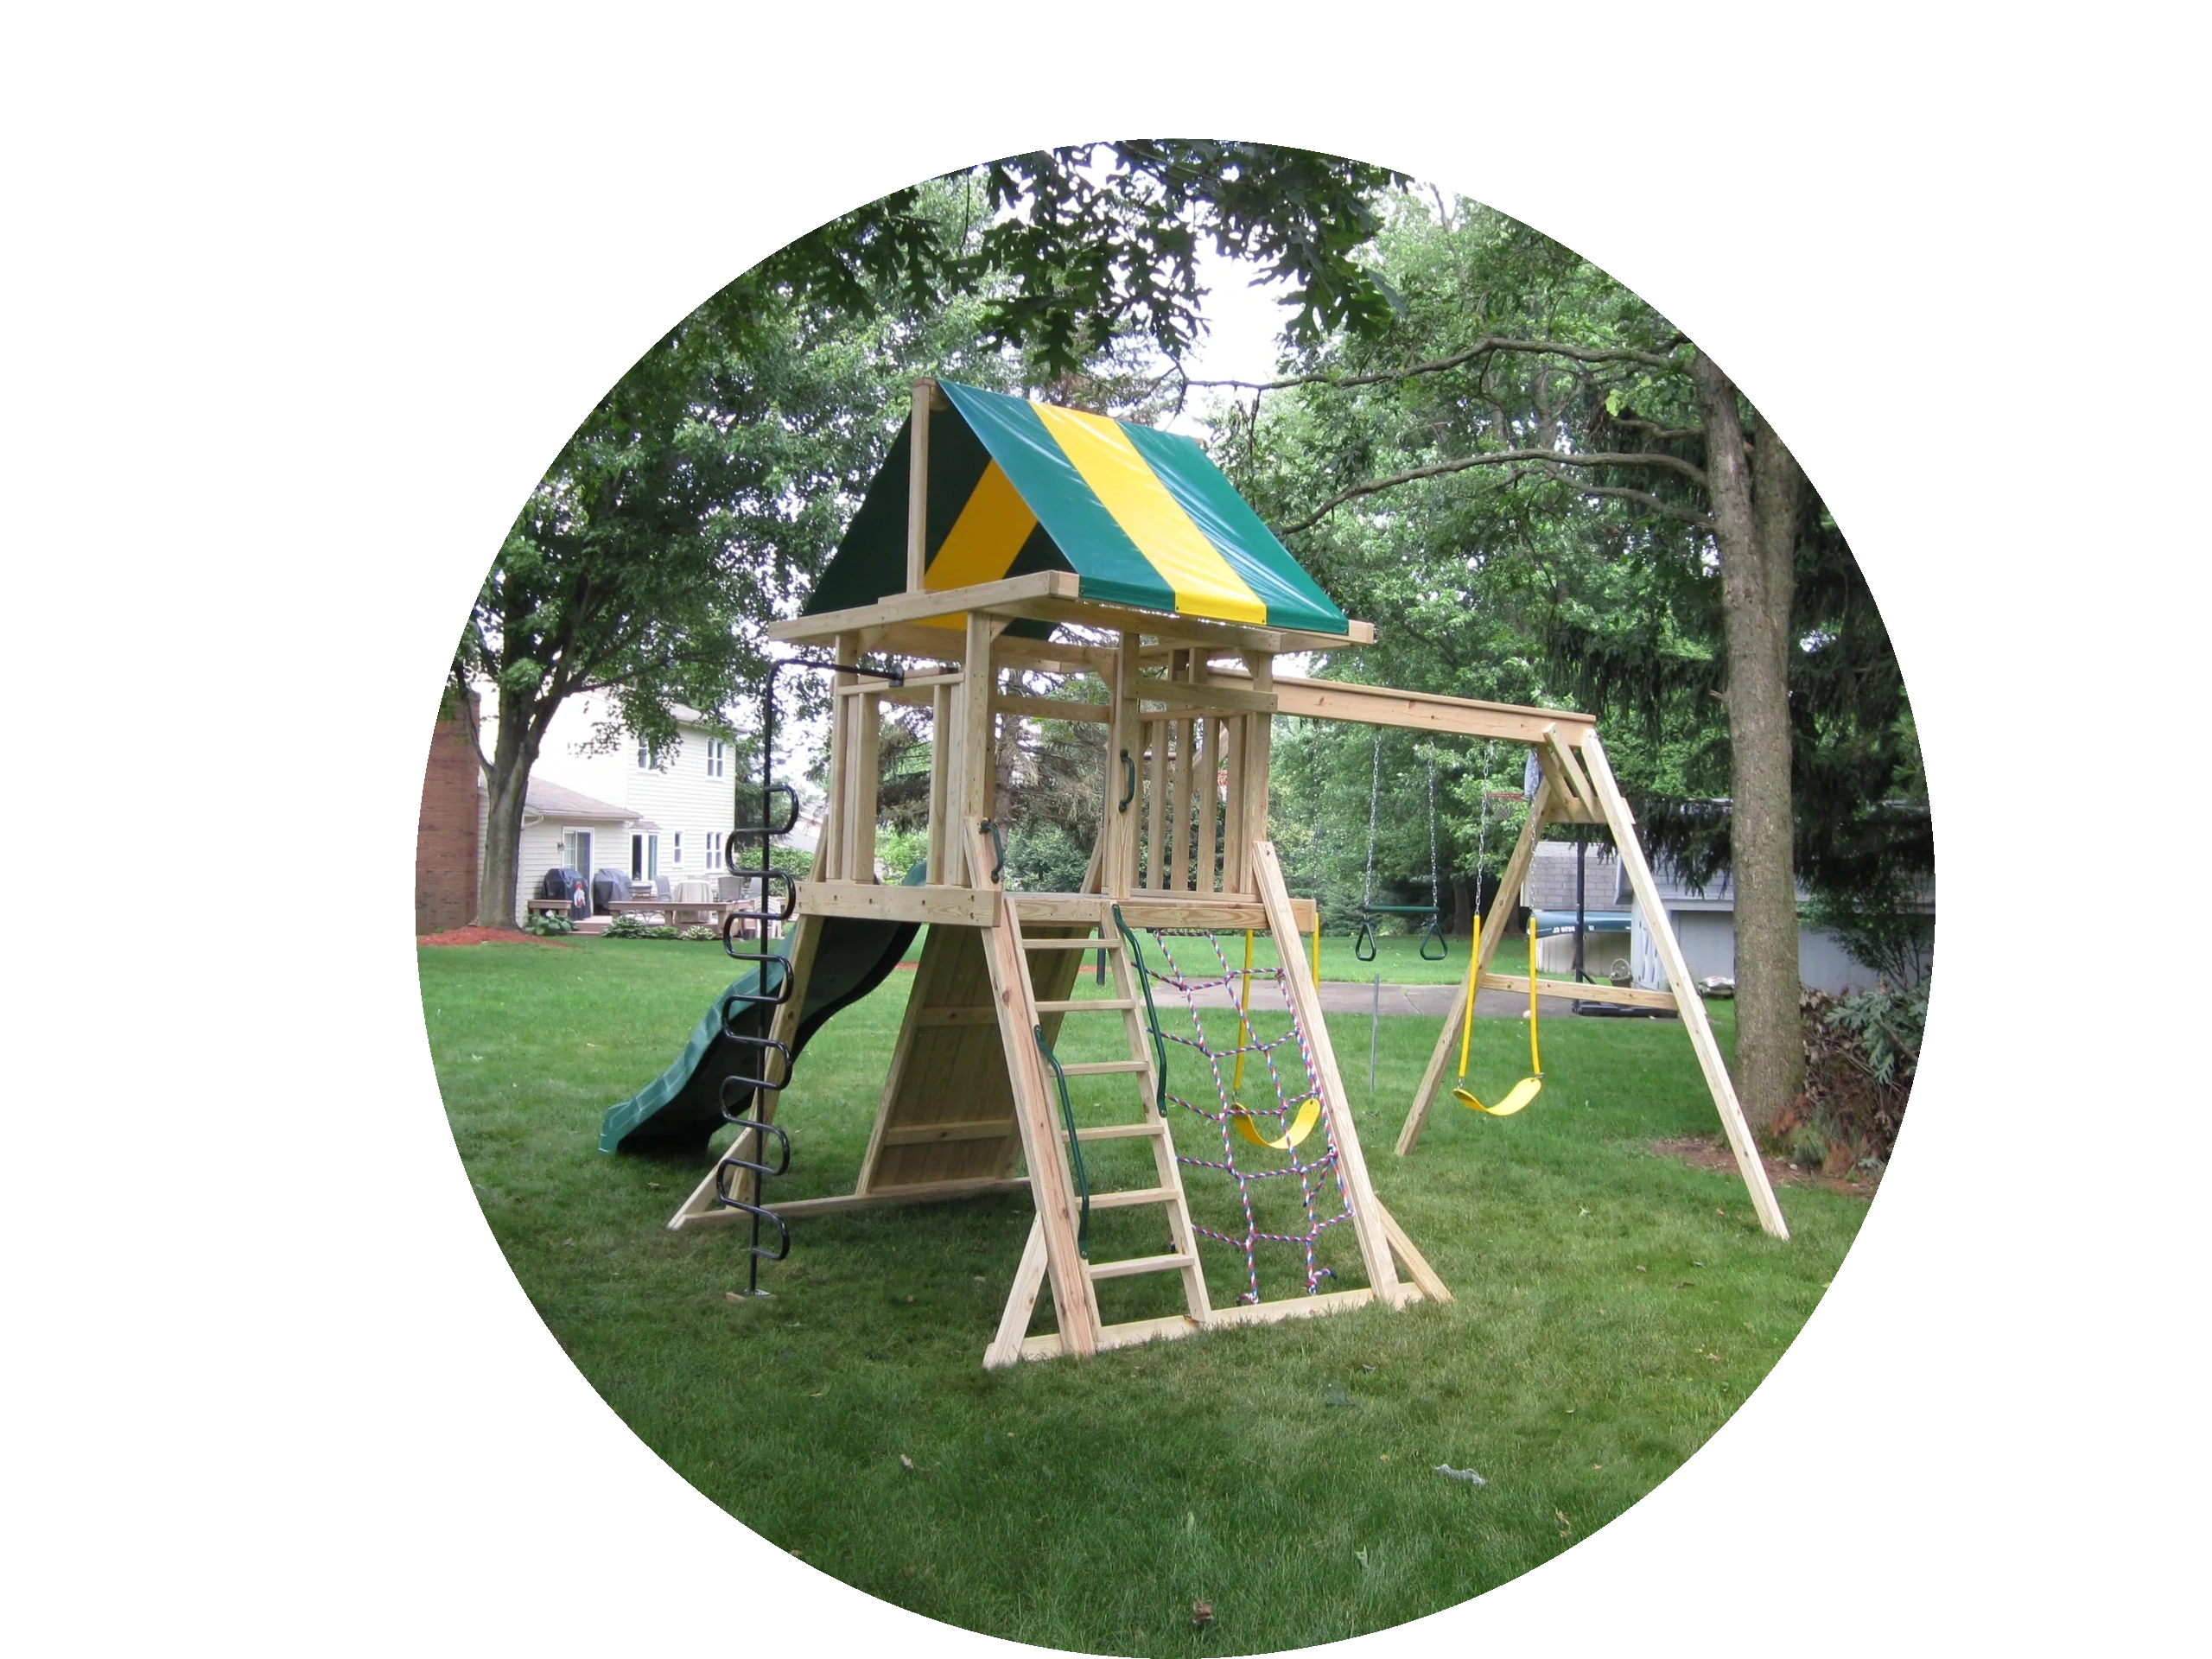 Single tower wooden playset, mountain climber tower with rockwall, slide, swings